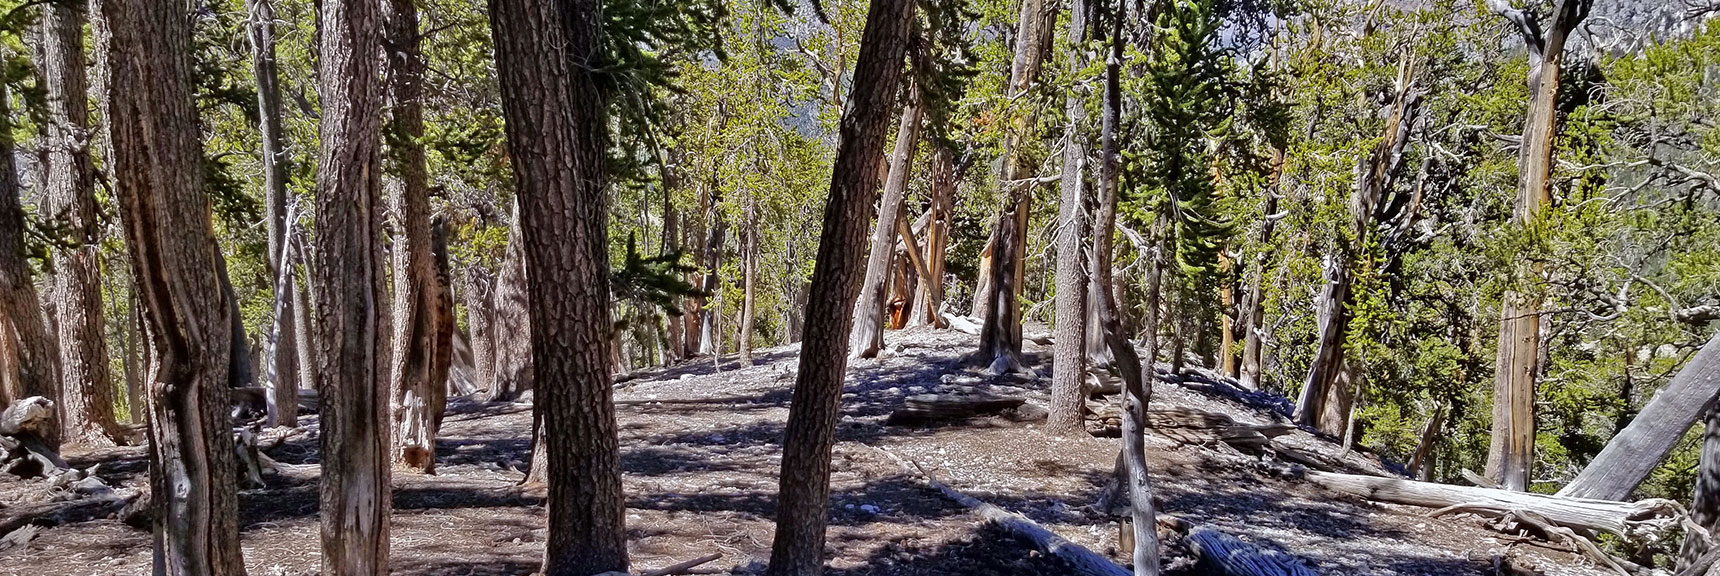 Back at the Wide Open Stretch Before the Gully Passage. Watching for My Cairn Markers | Lee to Kyle Canyon | Gradual Mid Ridge Approach | Mt. Charleston Wilderness | Spring Mountains, Nevada